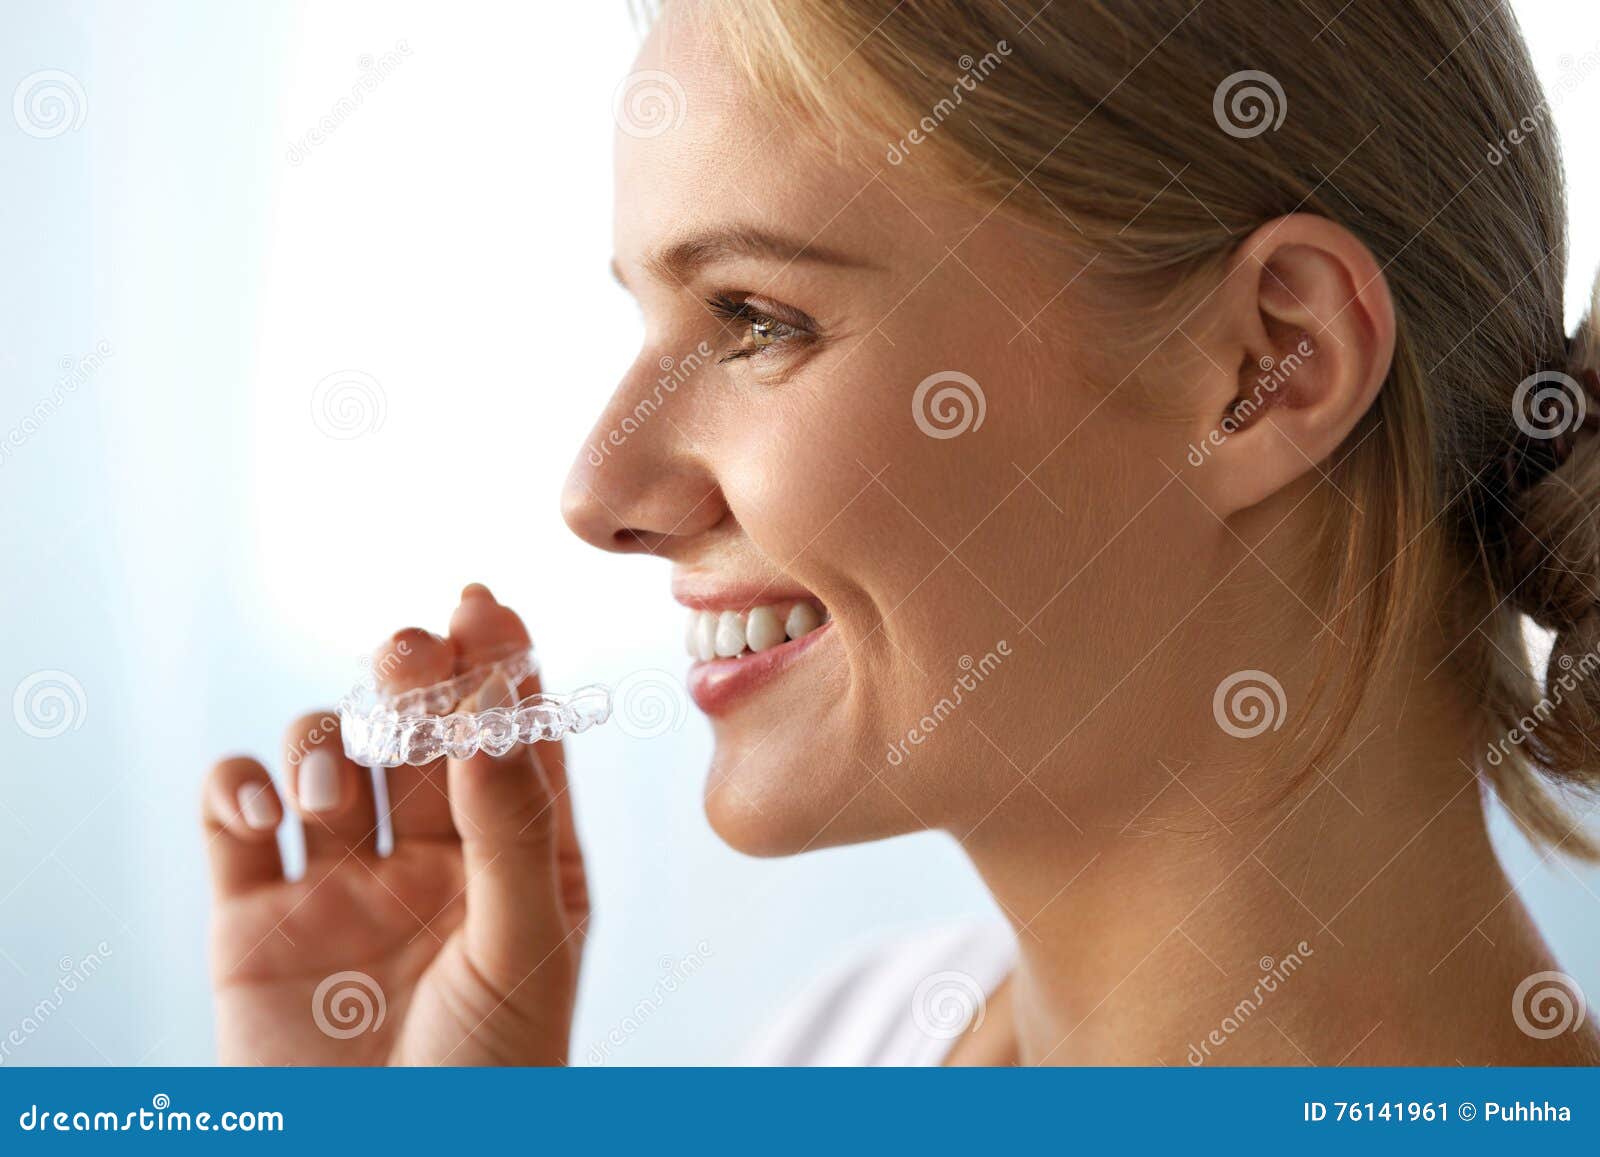 smiling woman with beautiful smile using invisible teeth trainer